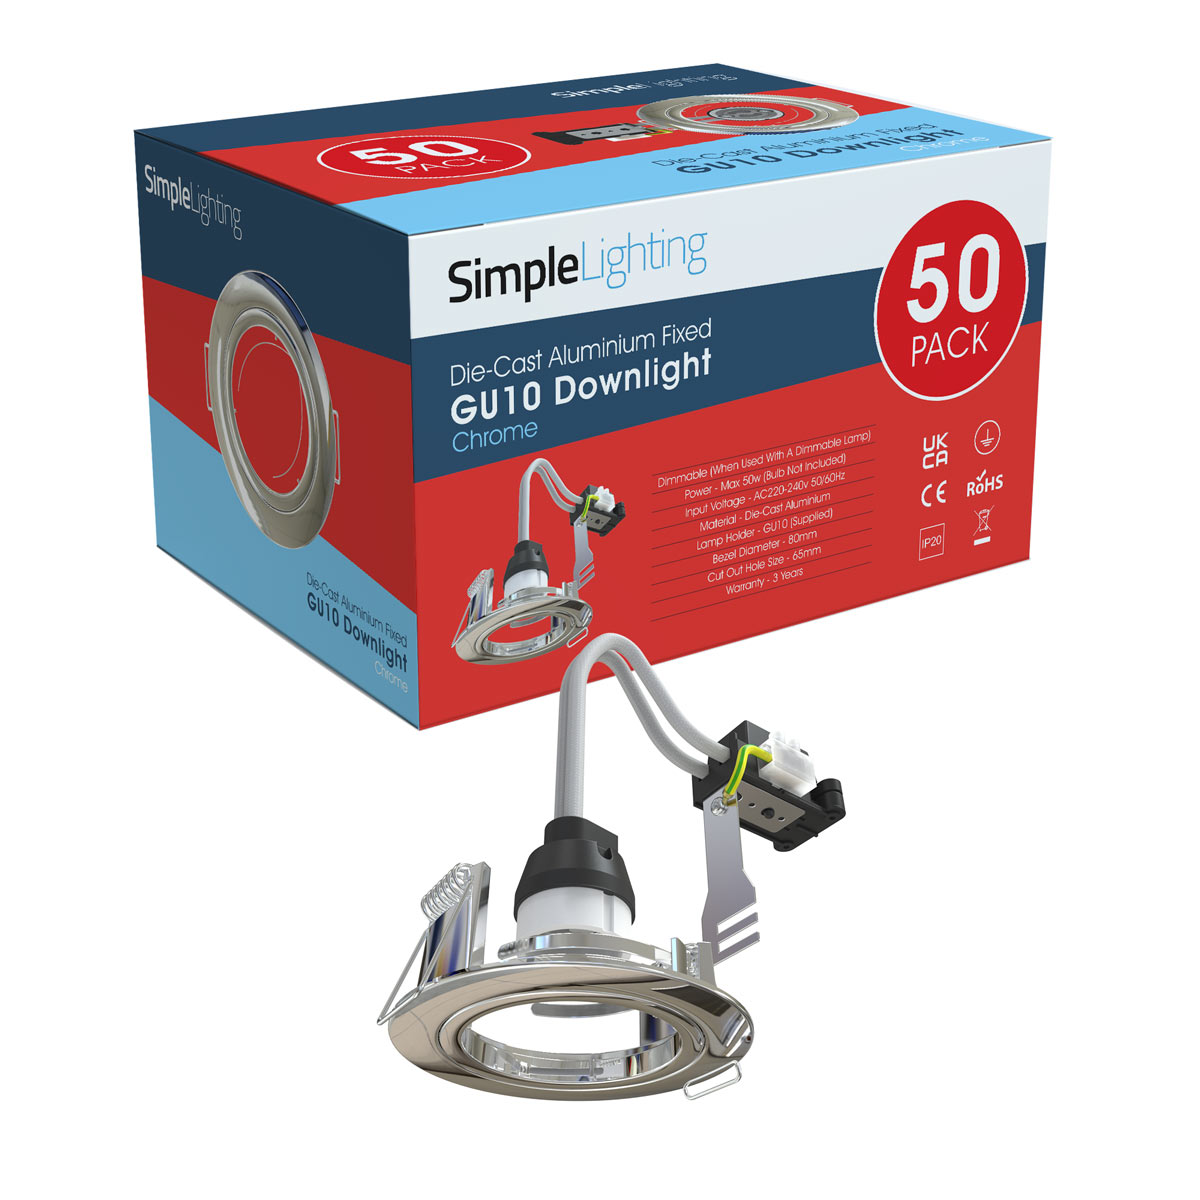 View Pack of 50 GU10 Downlight Fixed Die Cast in a Chrome Finish information